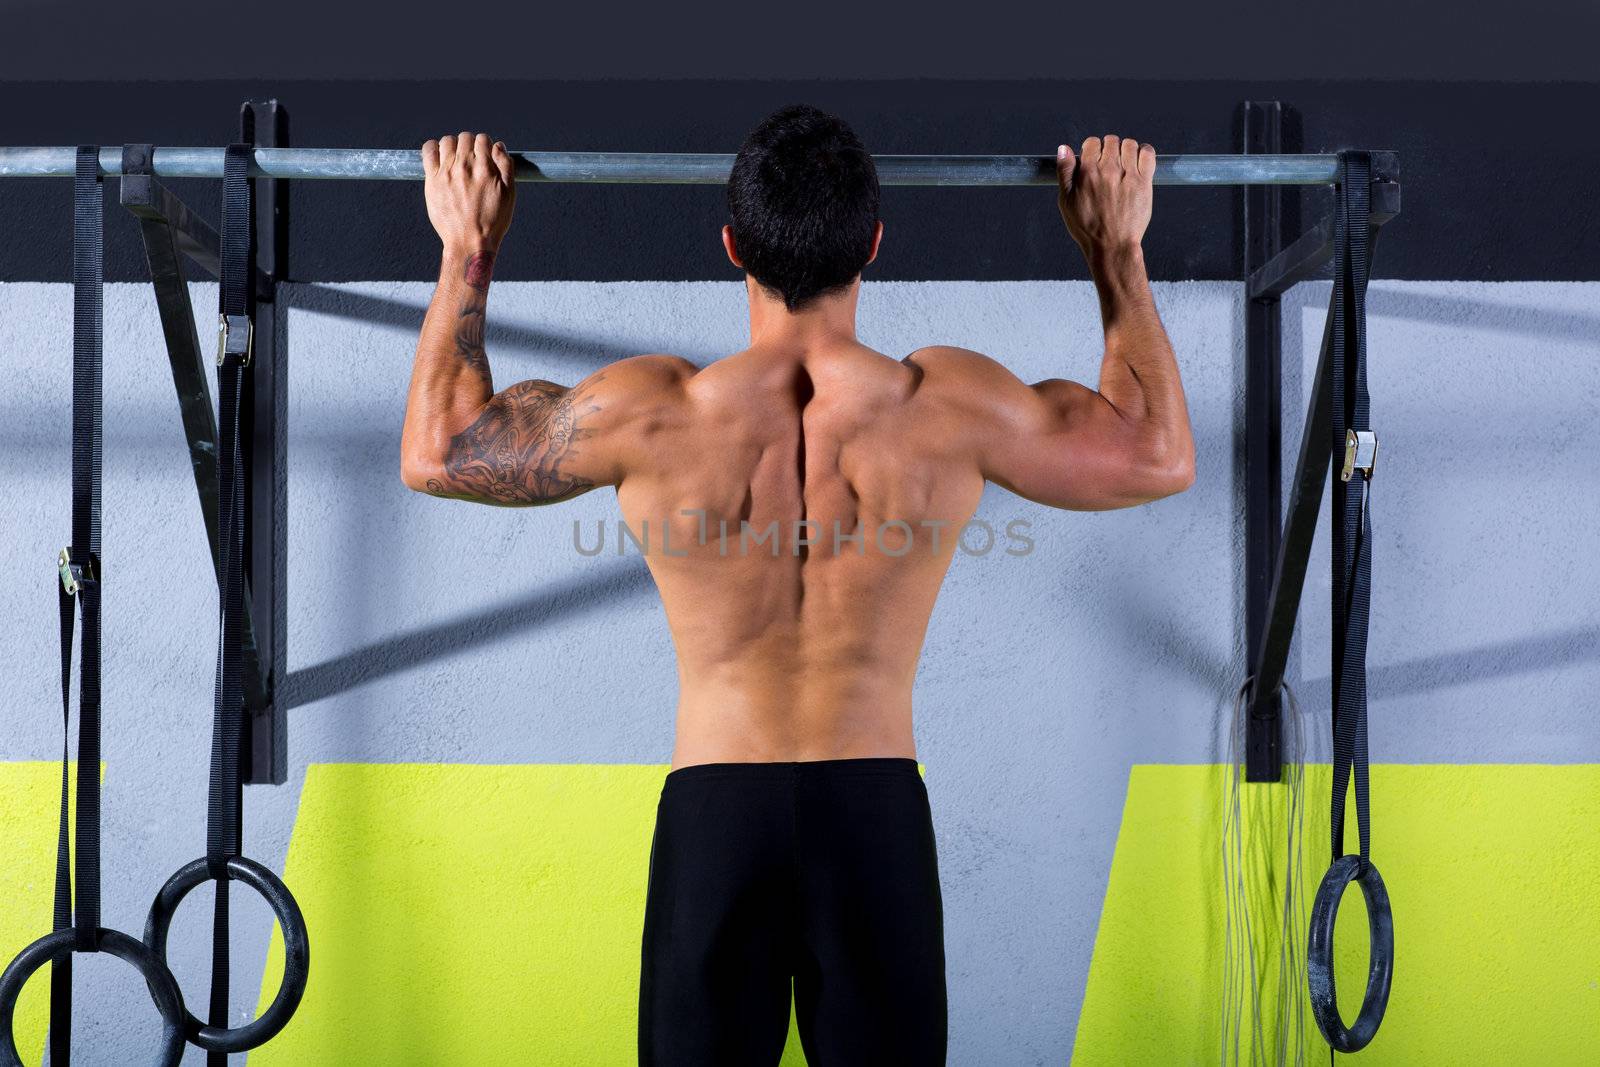 Crossfit toes to bar man pull-ups 2 bars workout exercise at gym